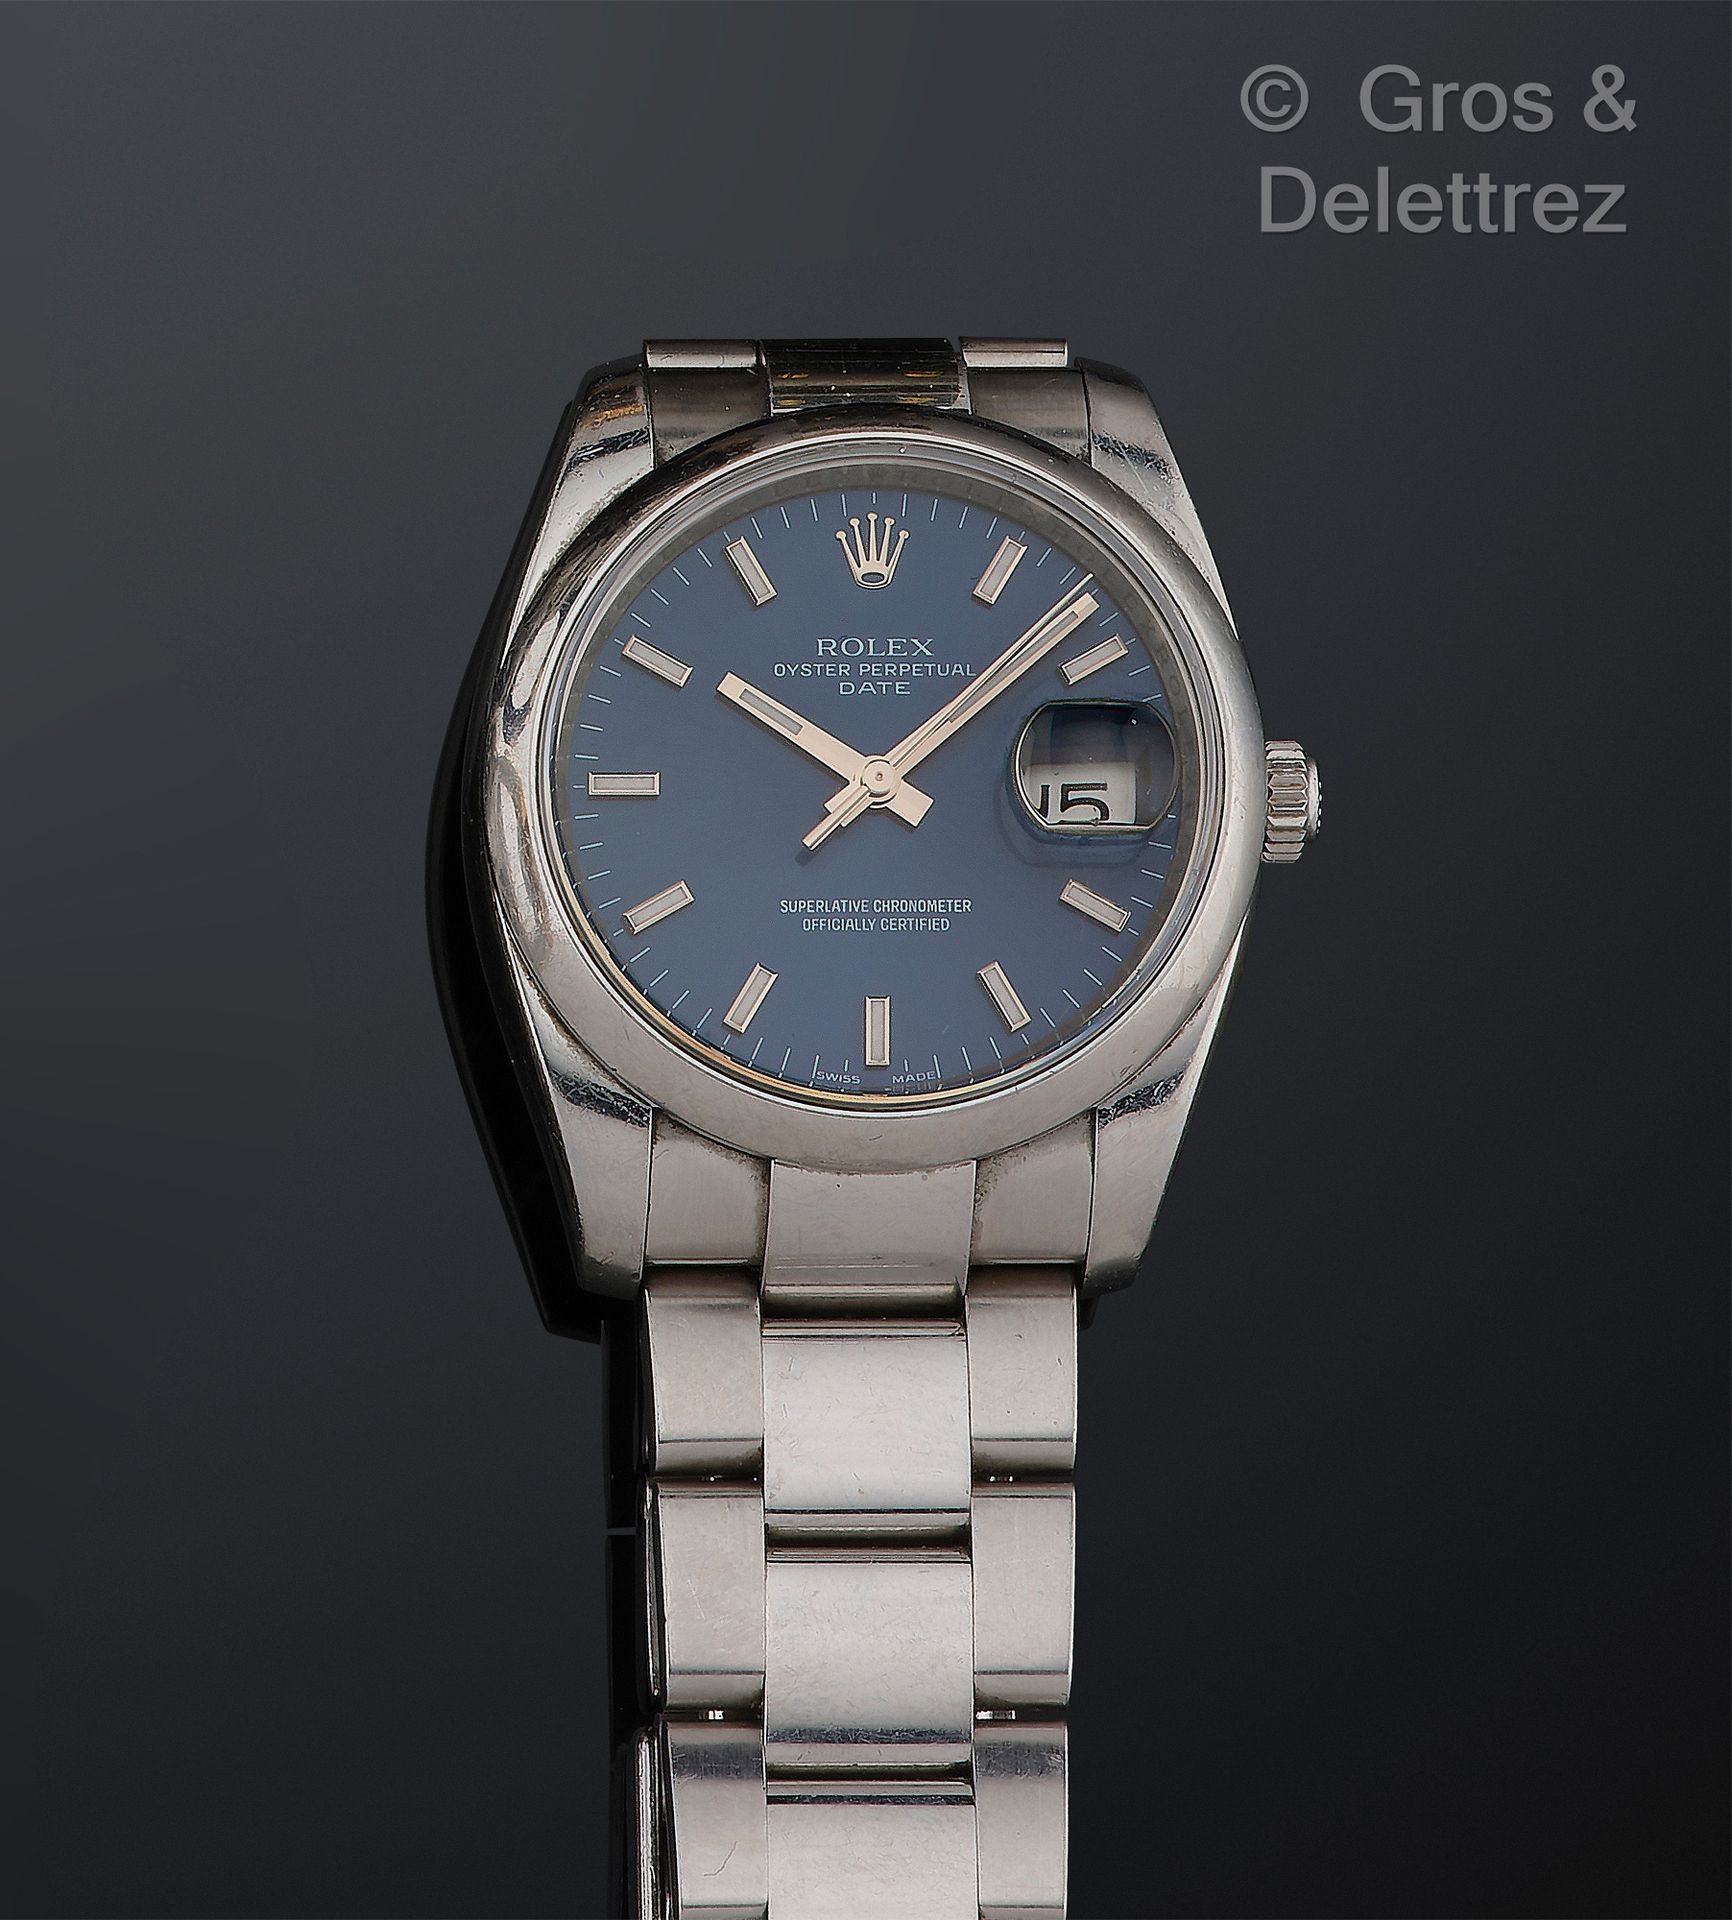 ROLEX « Oyster Perpetual DATE », vers 2007-2008 Armbanduhr aus Stahl, Oyster-Geh&hellip;